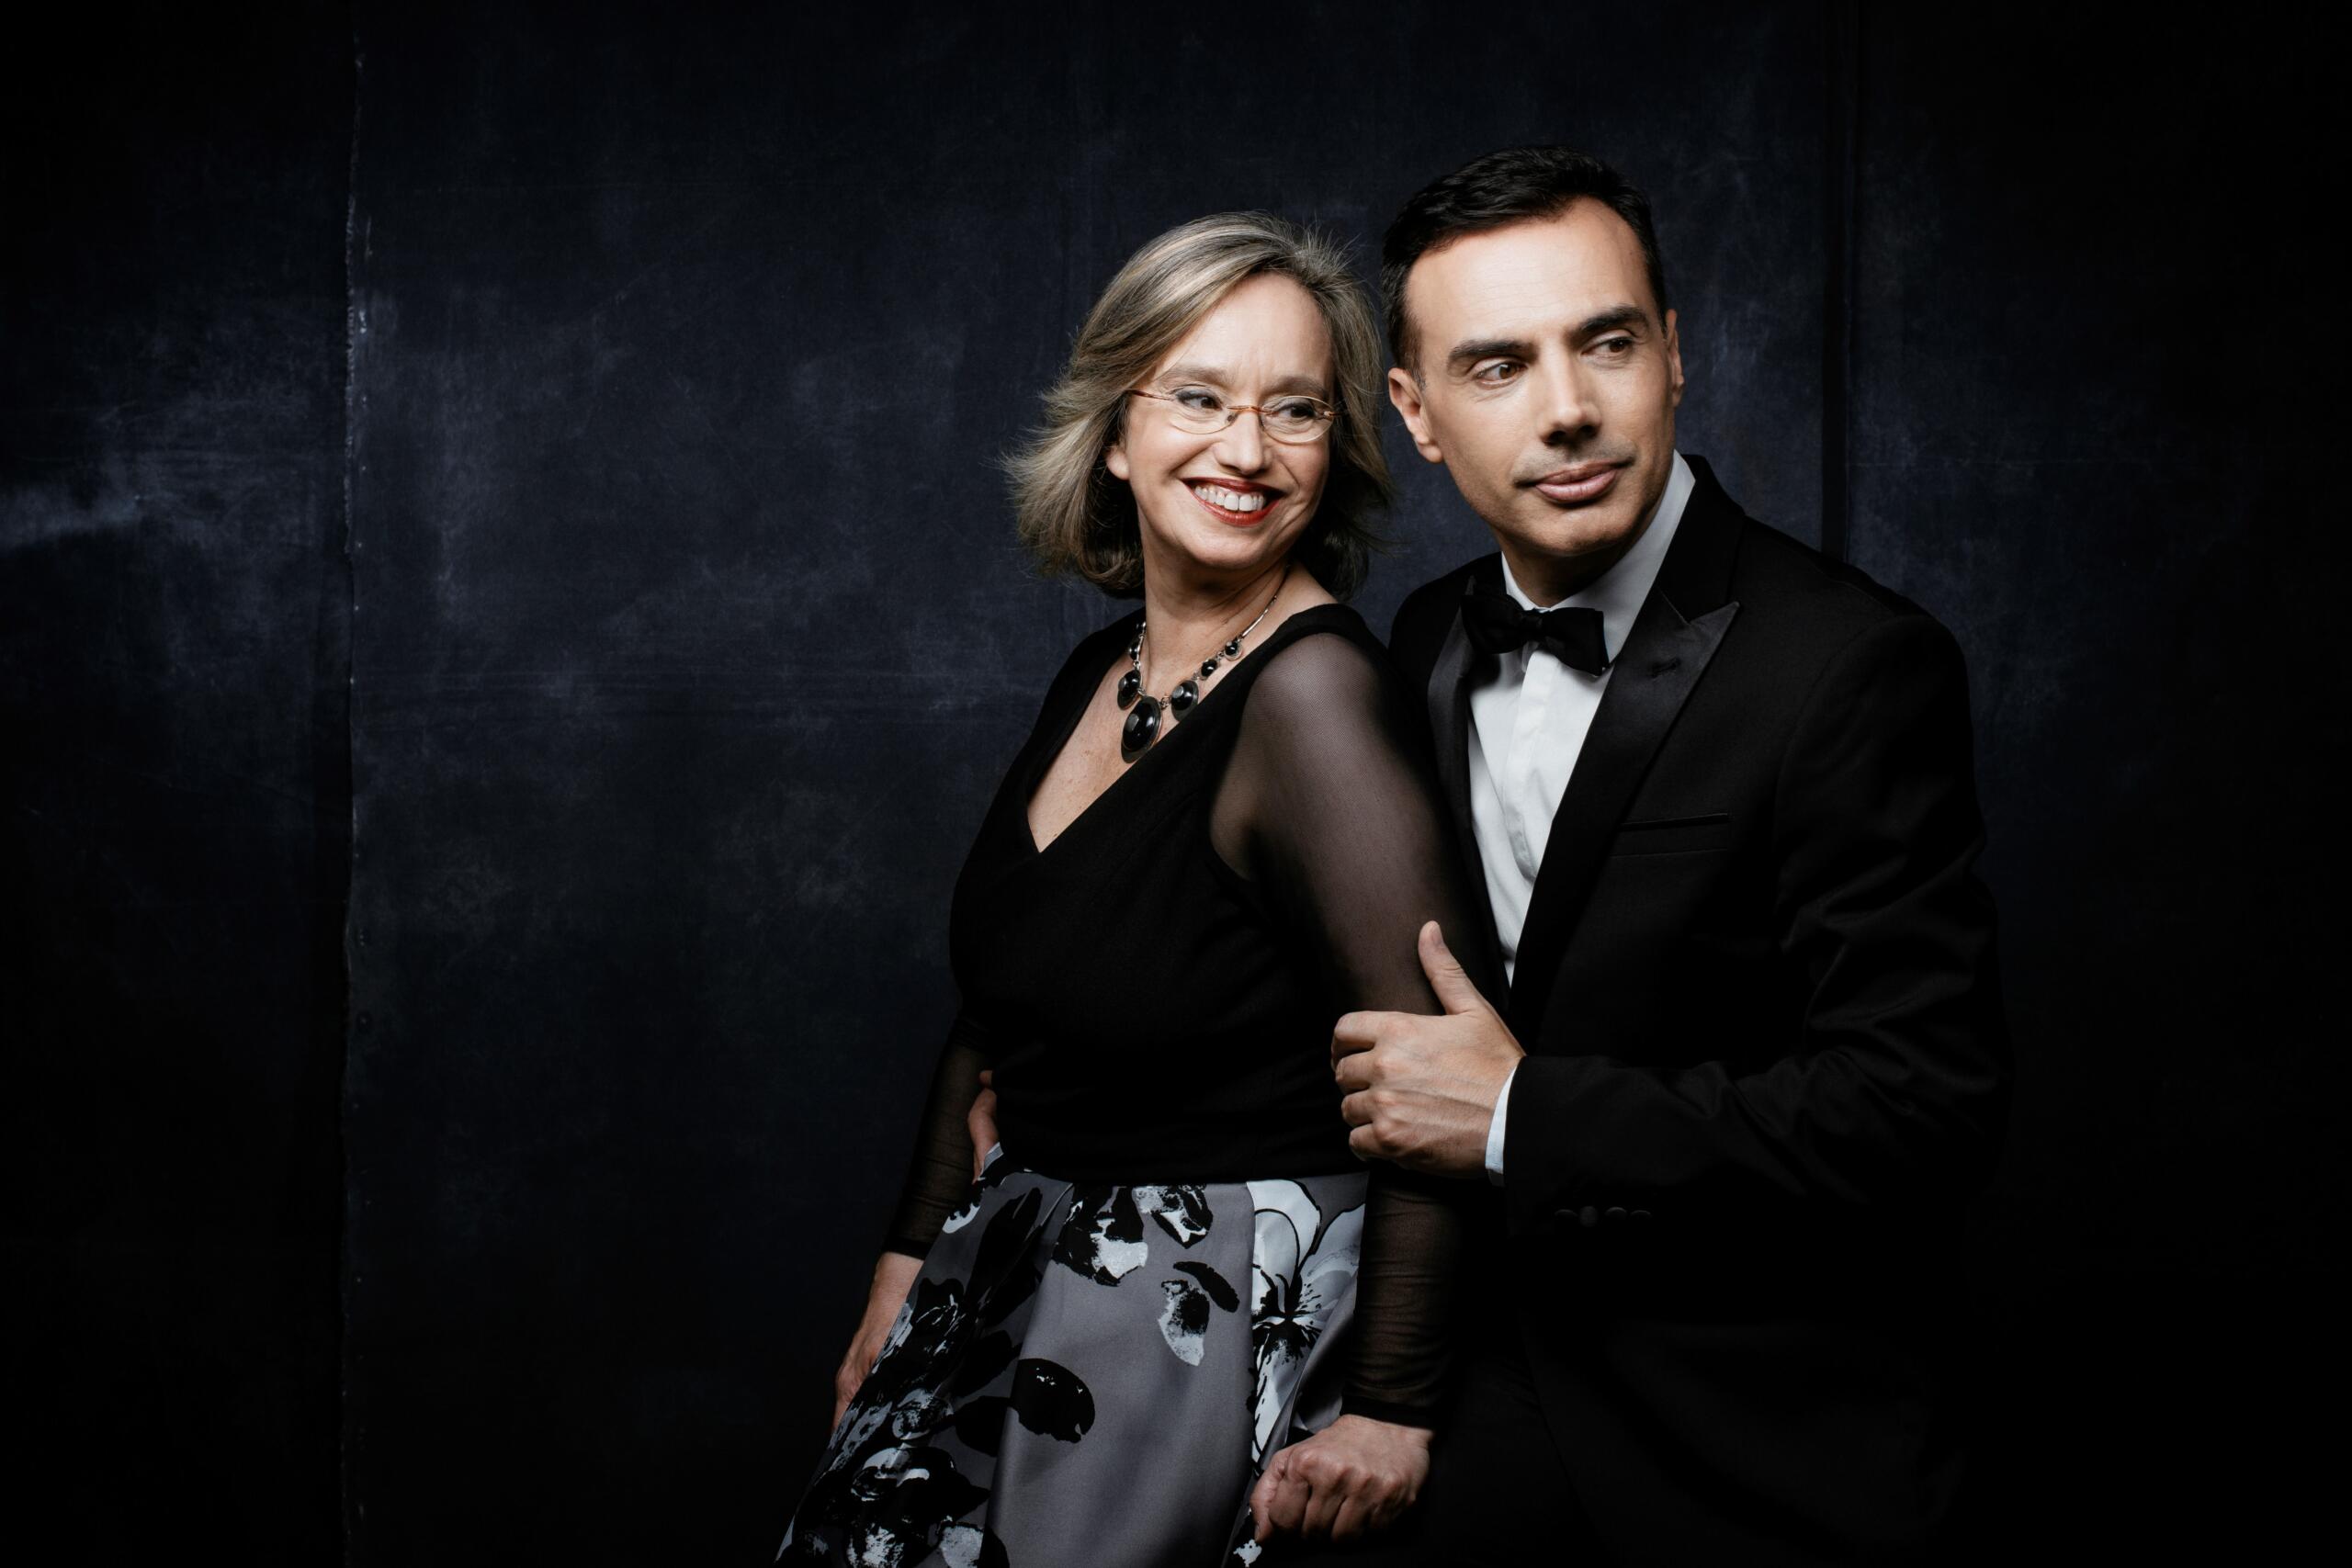 A dark background with a woman and a man in evening dress in front of it.